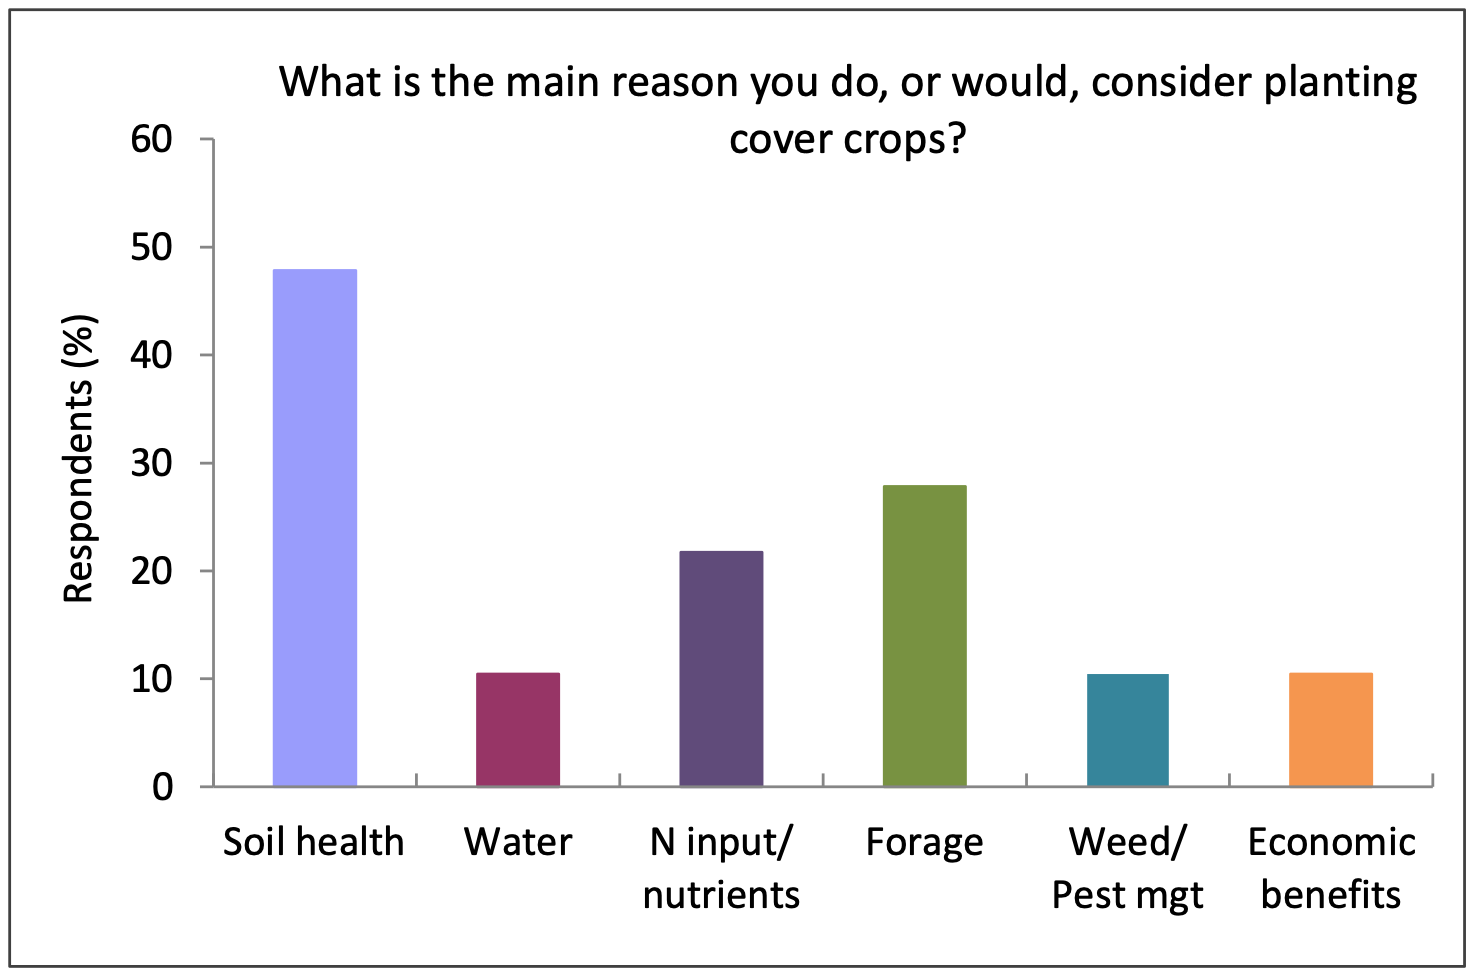 Reasons listed by 7% or fewer of the respondents include crop rotation, program incentives, reduce fallow, none, don't know, and sustainability. All respondents were asked to answer this question. N=130